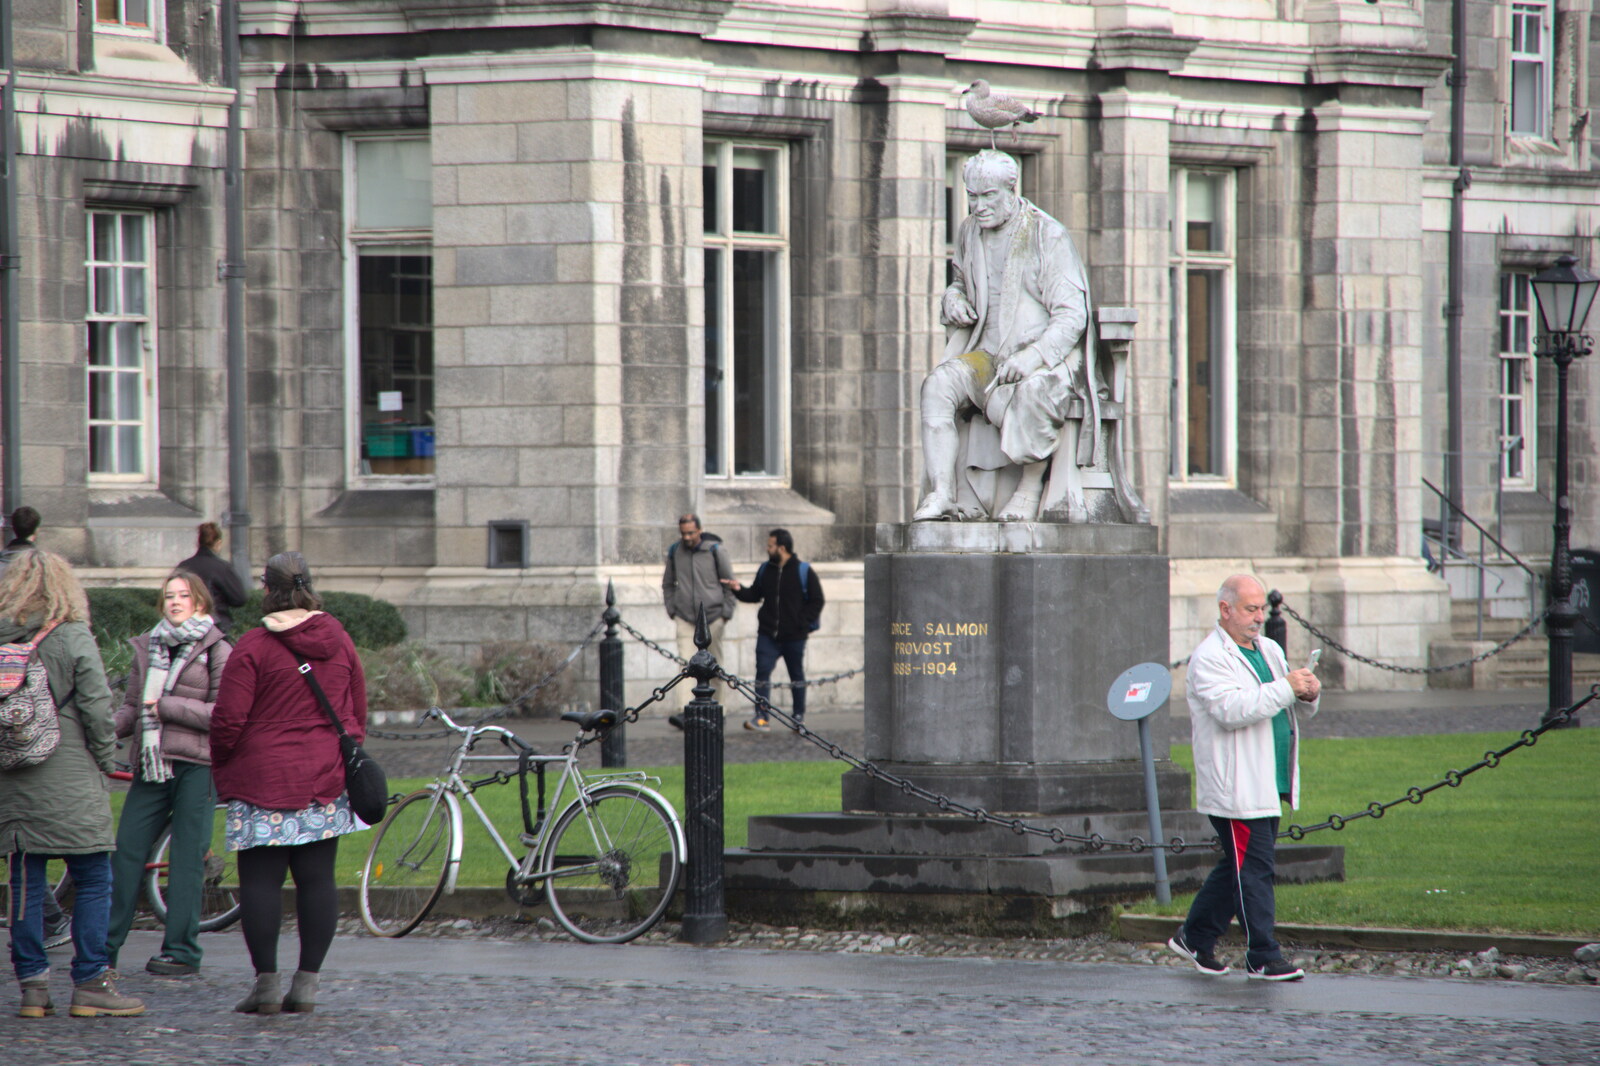 The Dead Zoo, Dublin, Ireland - 17th February 2023: A statue of George Salmon, provost of Trinity